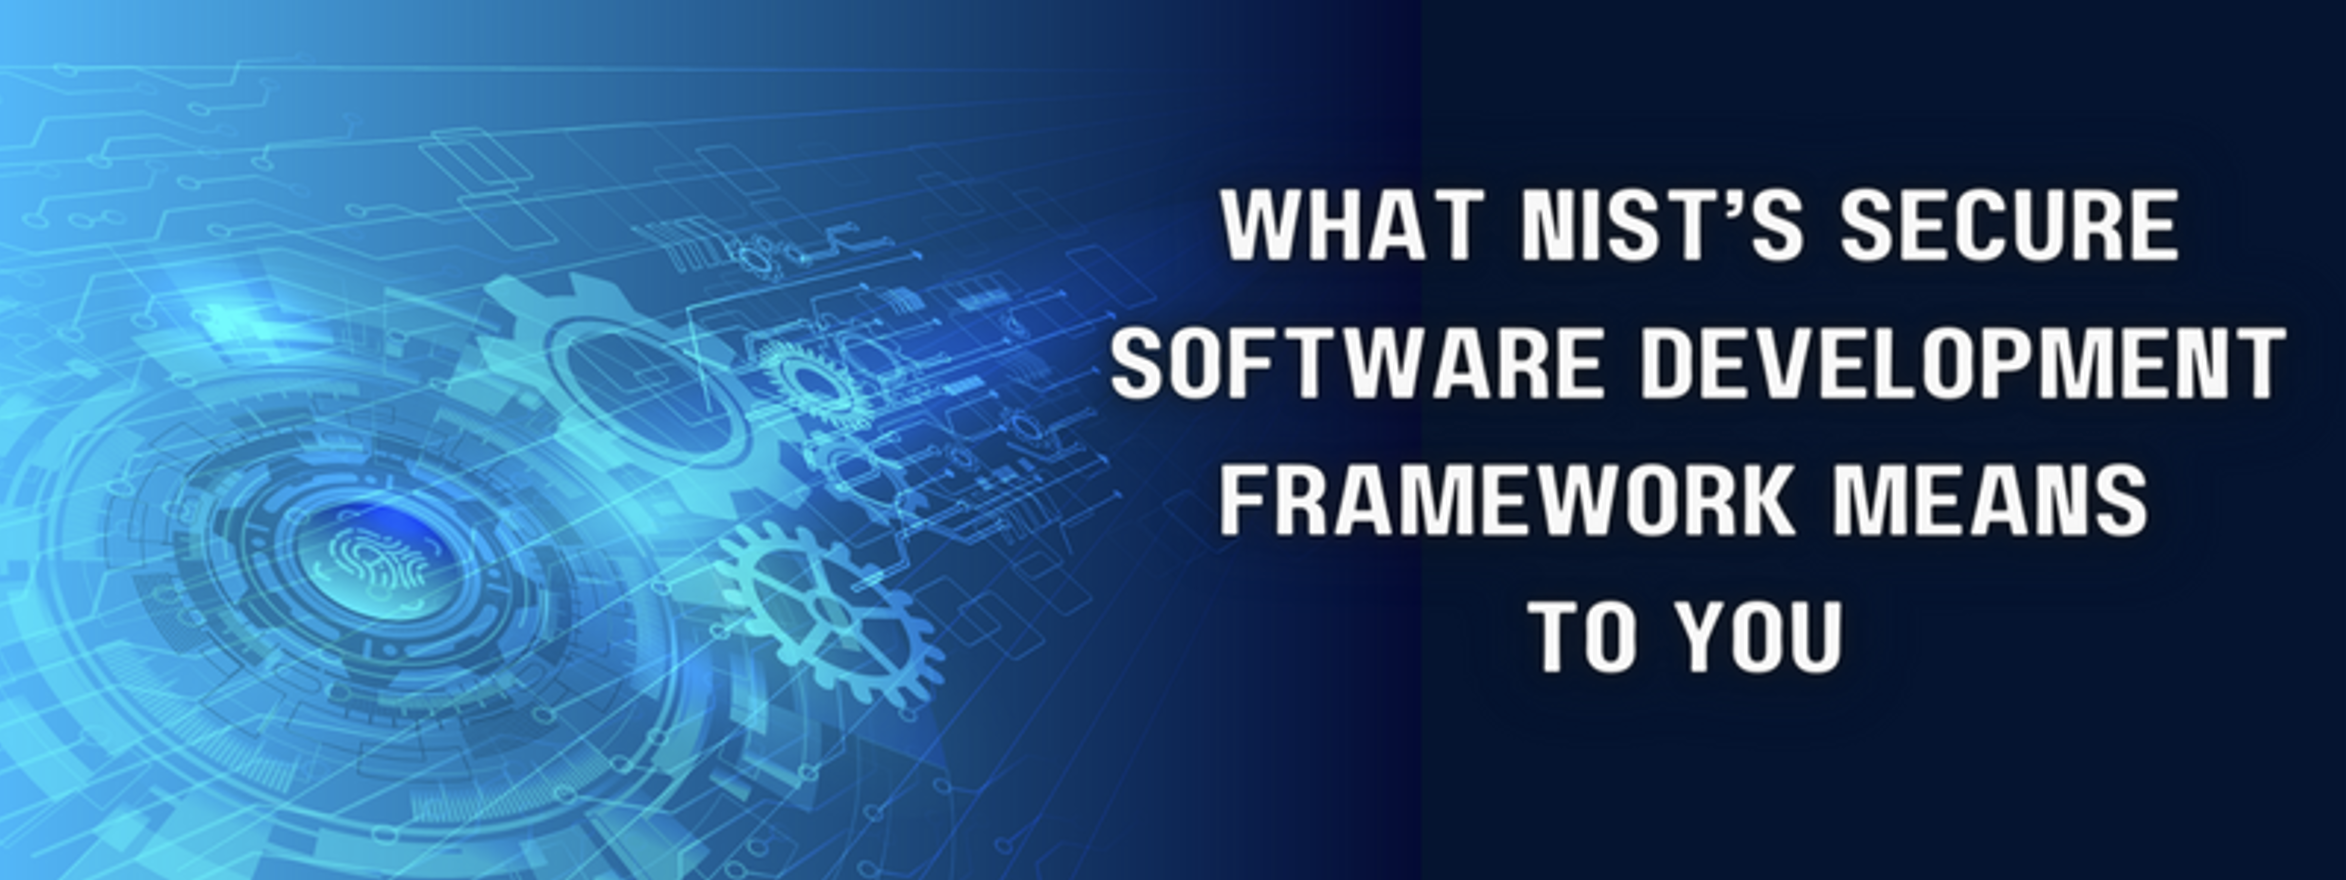 What NIST’s Secure Software Development Framework Means to You